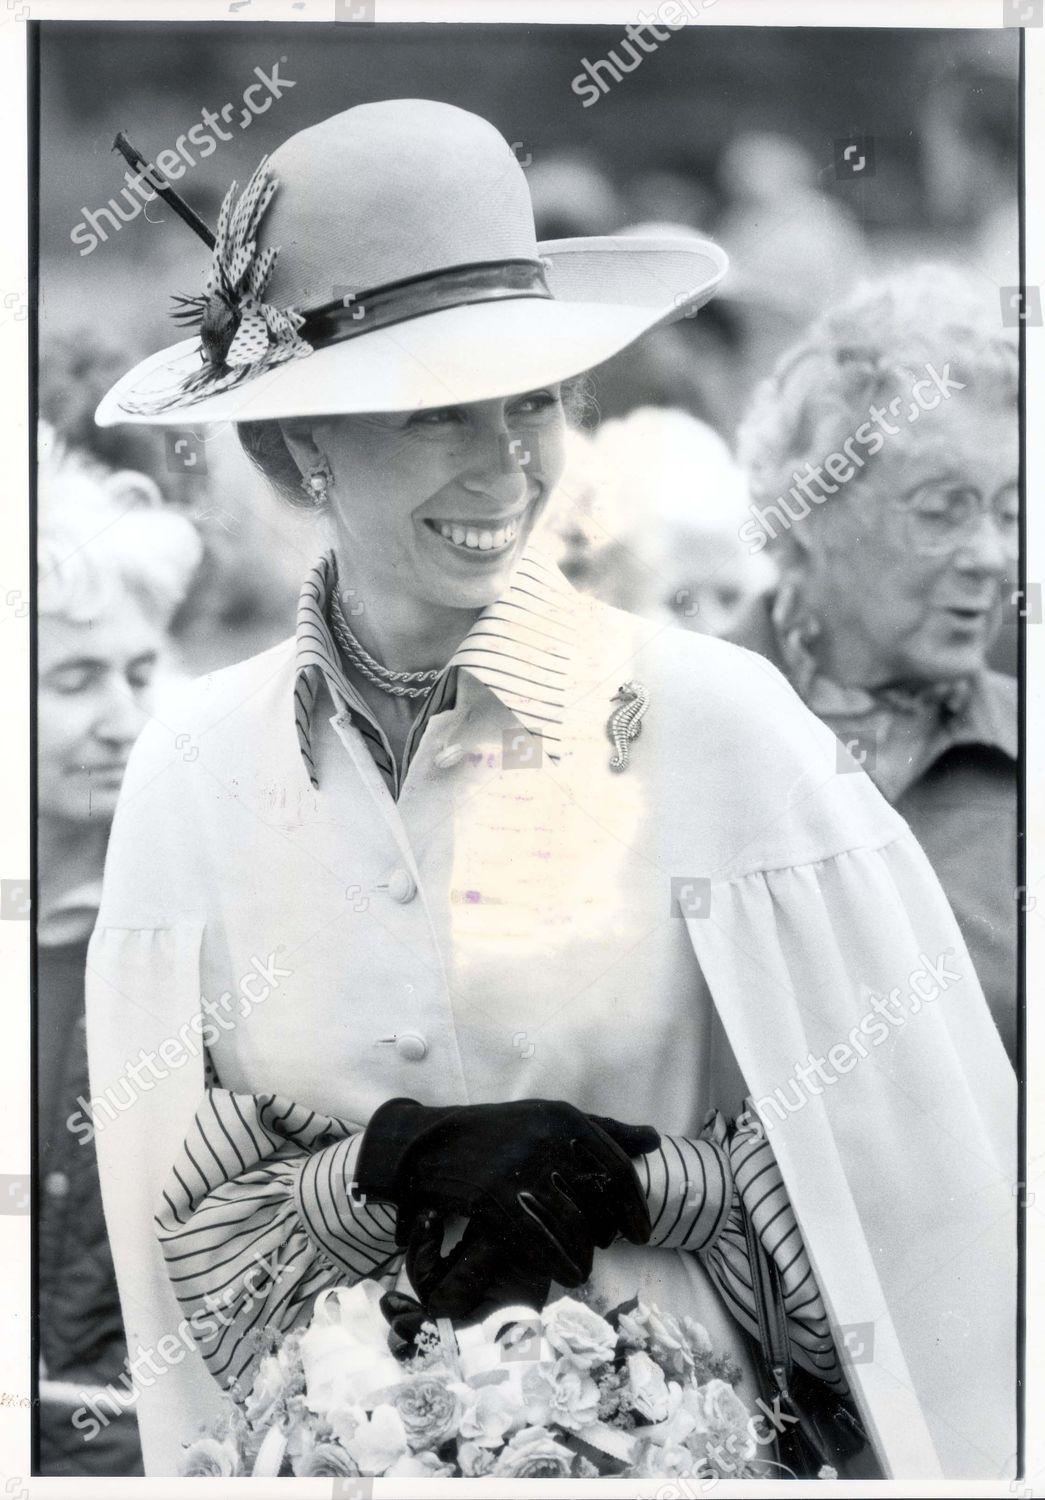 princess-anne-now-princess-royal-27-june-1983-a-stunning-princess-anne-in-white-sunshine-yellow-outfit-charms-the-crowd-at-ackworth-nr-pontefract-royalty-shutterstock-editorial-1138559a.jpg